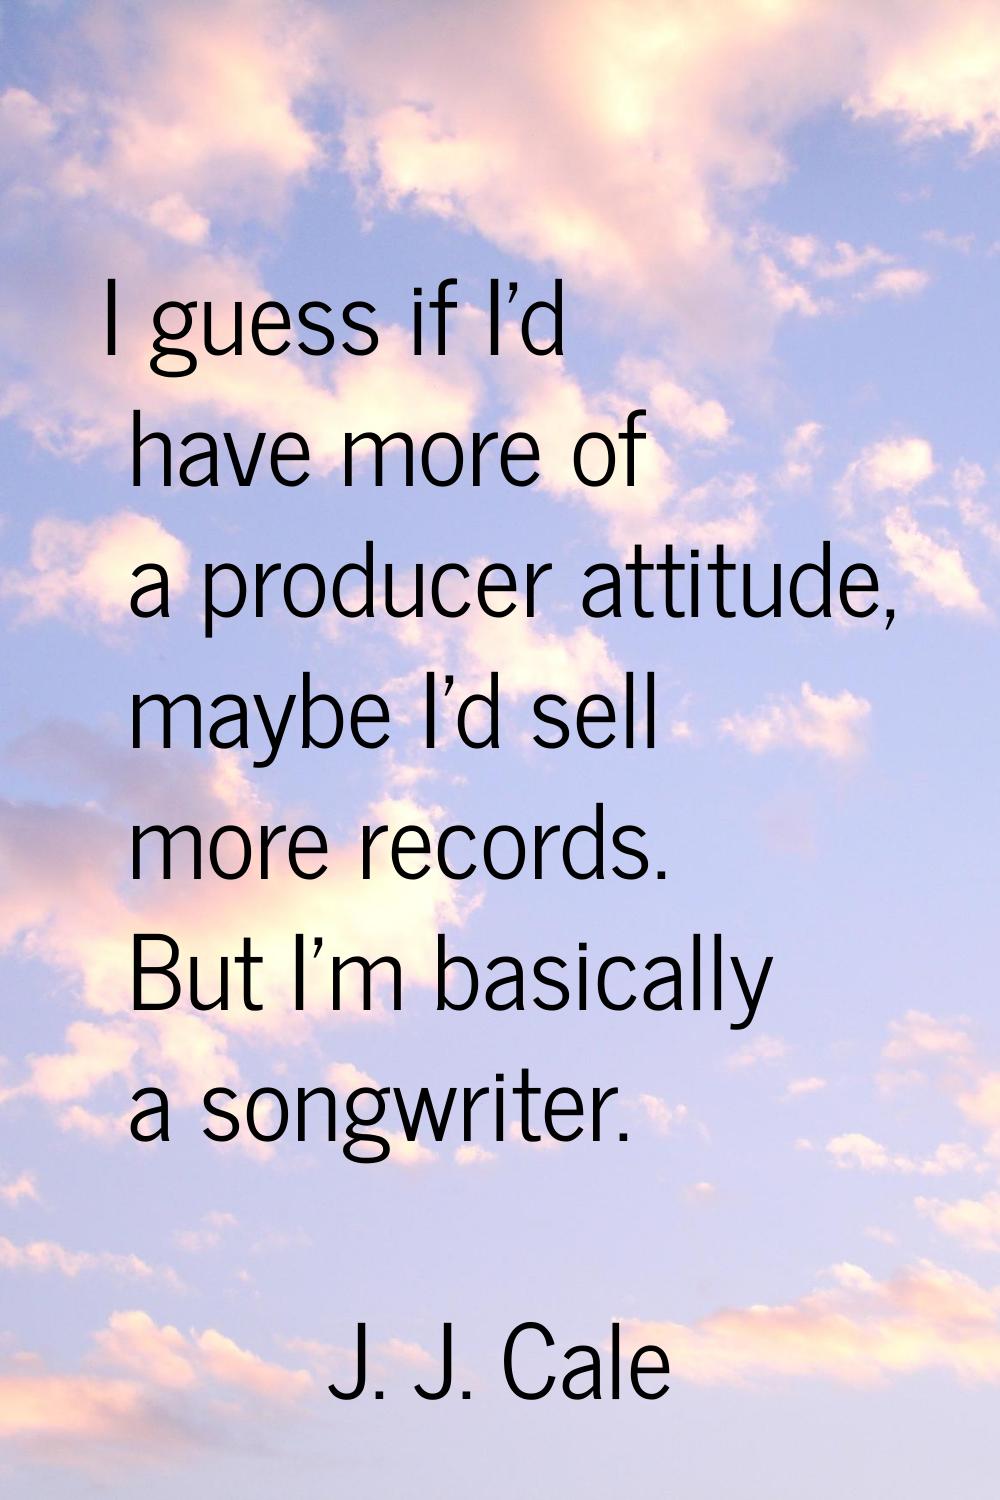 I guess if I'd have more of a producer attitude, maybe I'd sell more records. But I'm basically a s